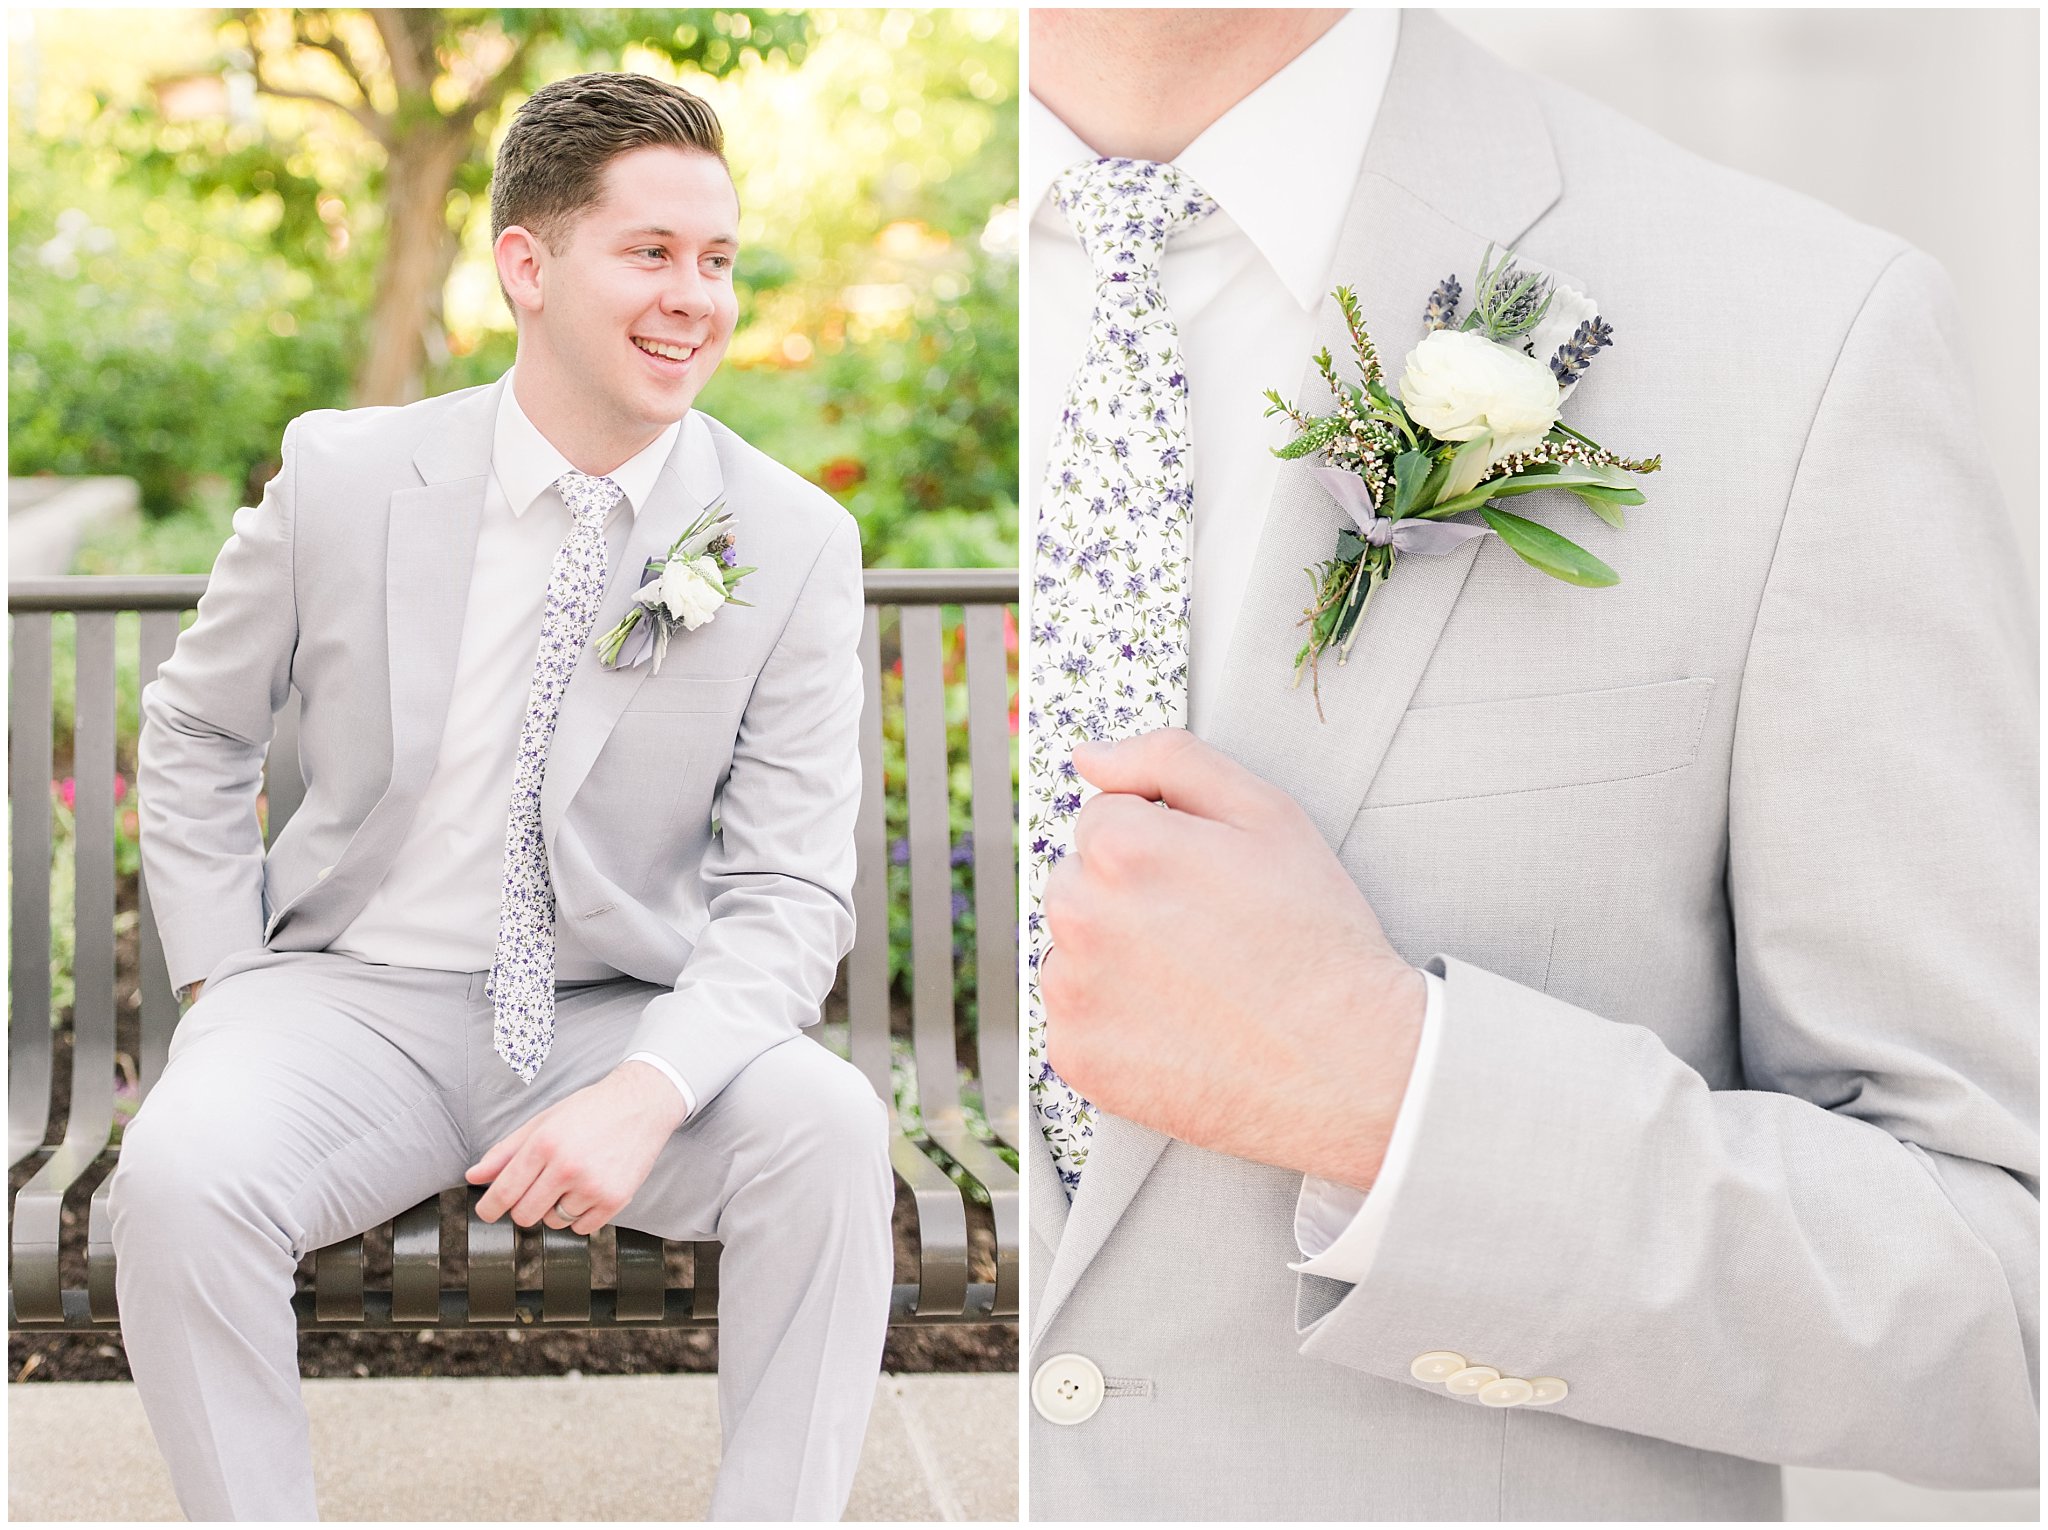 Groom in grey suit with lavender floral tie | Salt Lake Temple Wedding and Clearfield City Hall Reception | Utah Wedding Photographers | Jessie and Dallin Photography